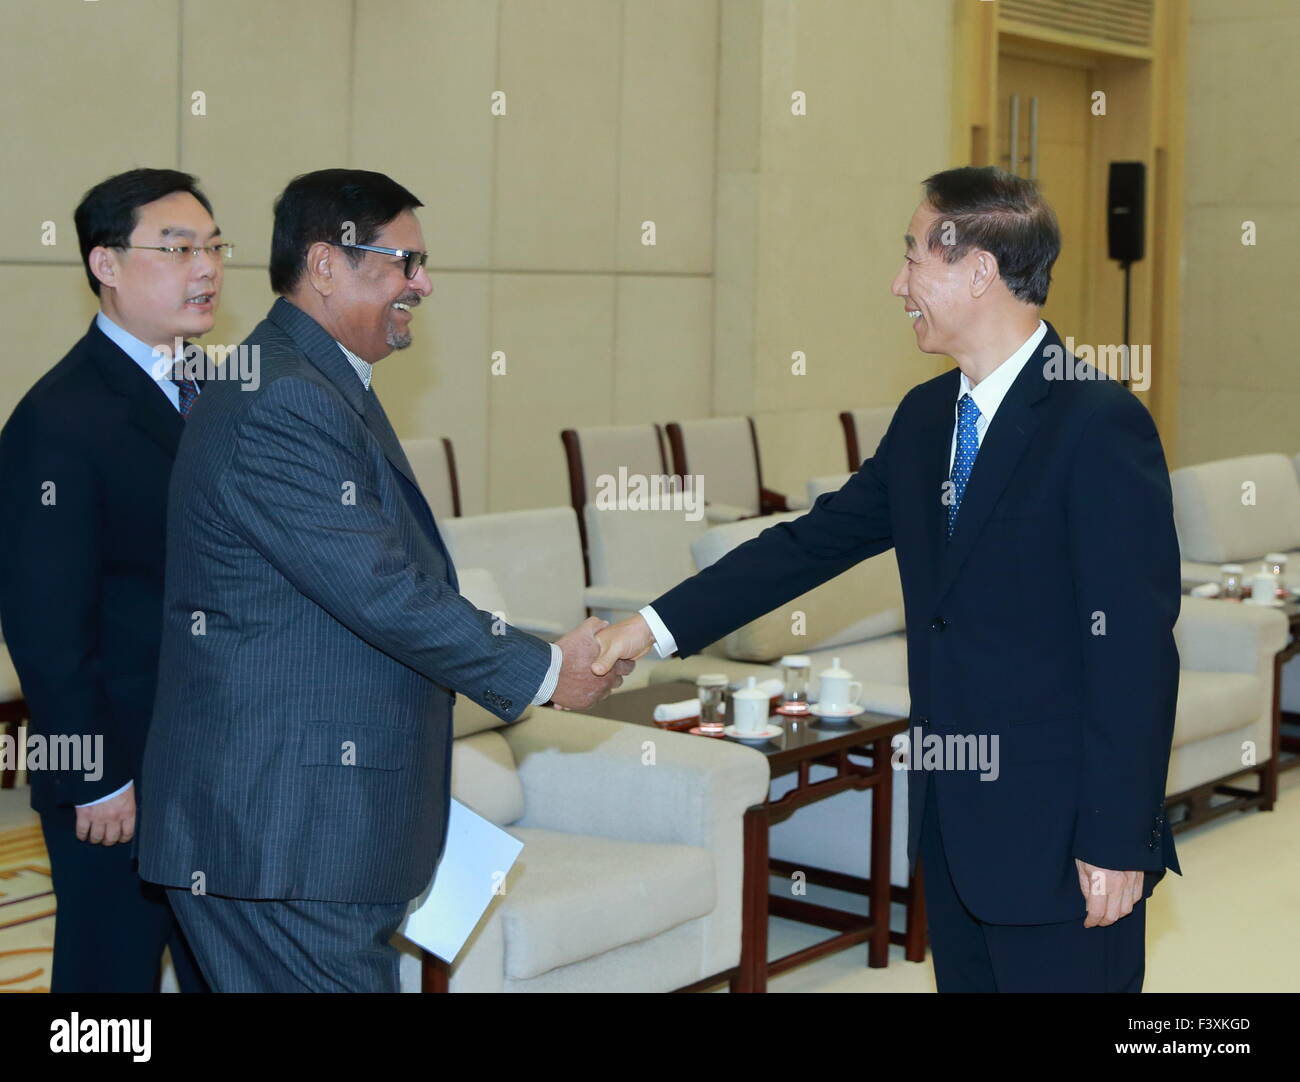 Beijing, China. 13th Oct, 2015. Wang Jiarui (R), vice chairman of the National Committee of the Chinese People's Political Consultative Conference and head of the International Department of the Communist Party of China (CPC) Central Committee, meets with Showkutally Soodhun, president of the Militant Socialist Movement (MSM) of Mauritius, in Beijing, capital of China, Oct. 13, 2015. © Ding Haitao/Xinhua/Alamy Live News Stock Photo